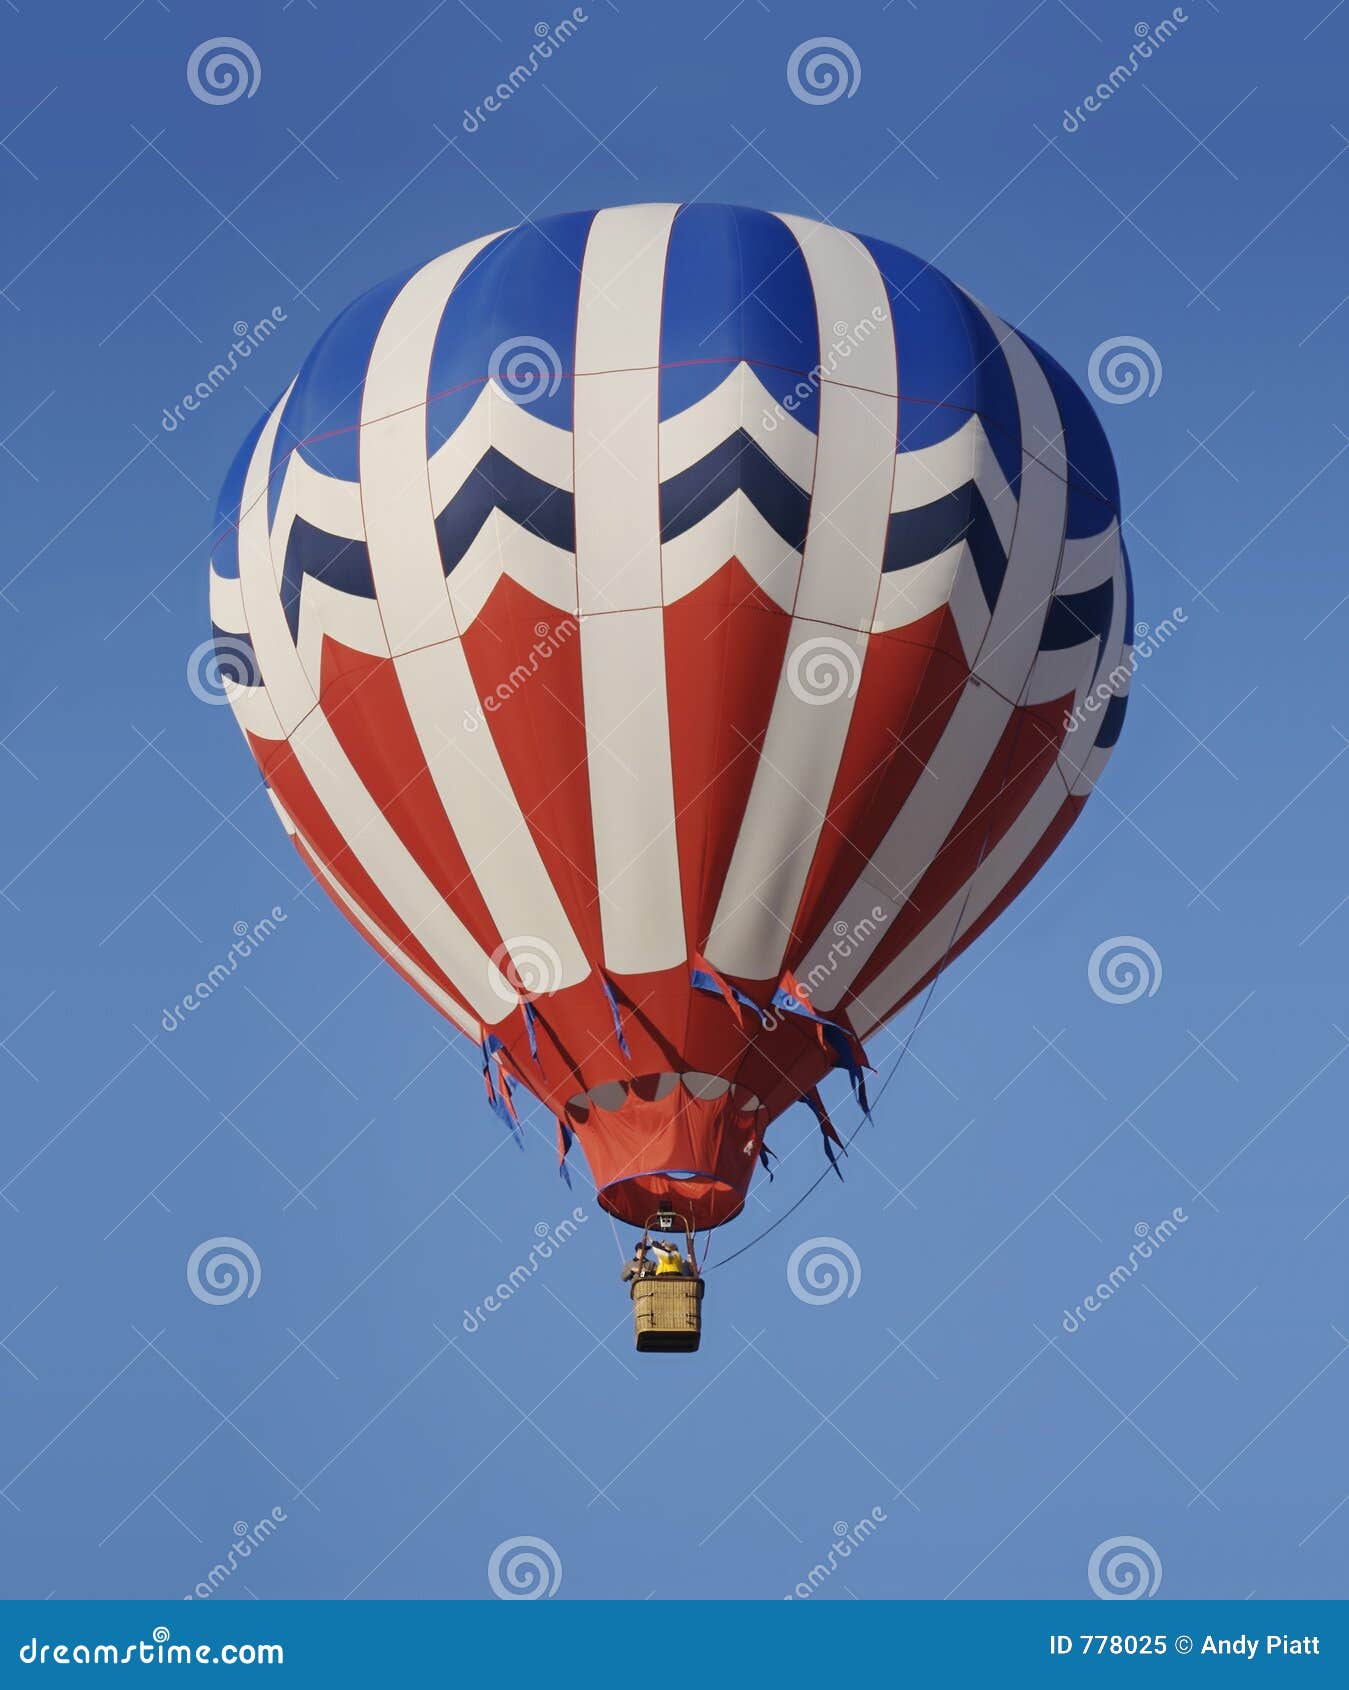 Albums 96+ Images red white and blue hot air balloon Stunning